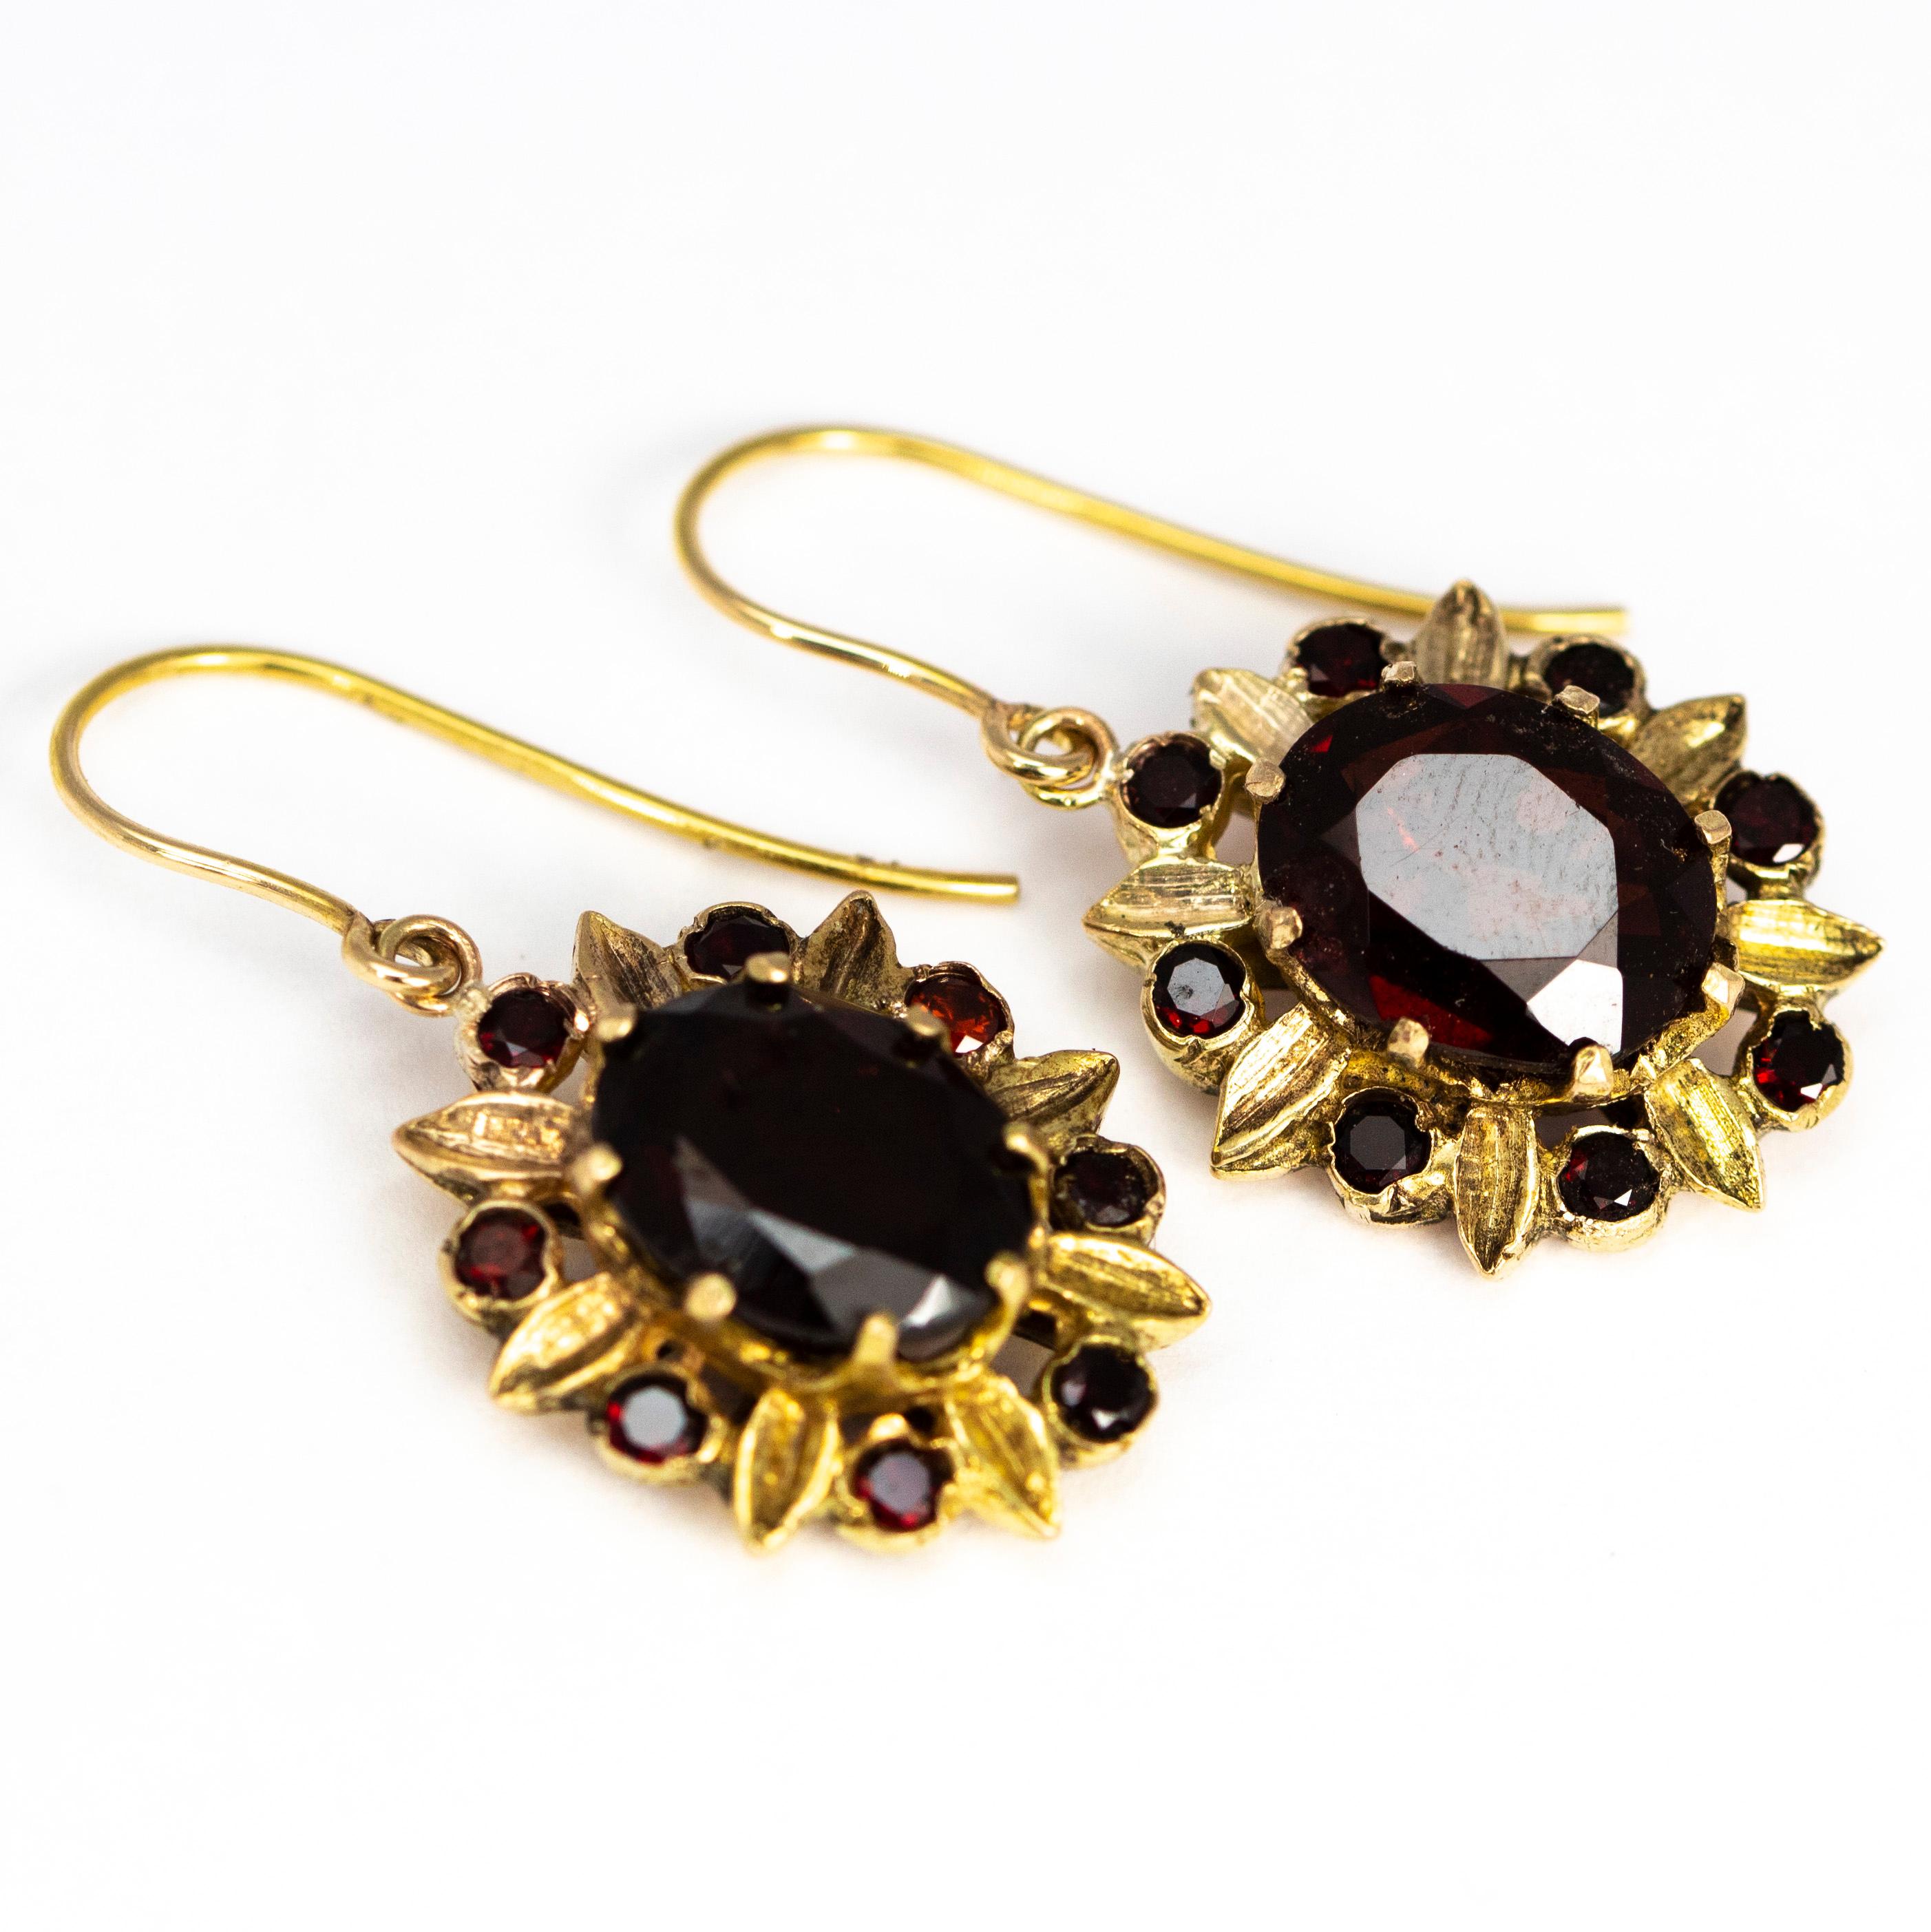 These gorgeous earrings hold a large garnet at the centre of a floral style cluster which holds smaller garnets and small leaf type gold details around the edge. 

Centre stone: 10.5mm 
From Ear To Bottom Of Drop: 30mm 

Weight: 6.43g